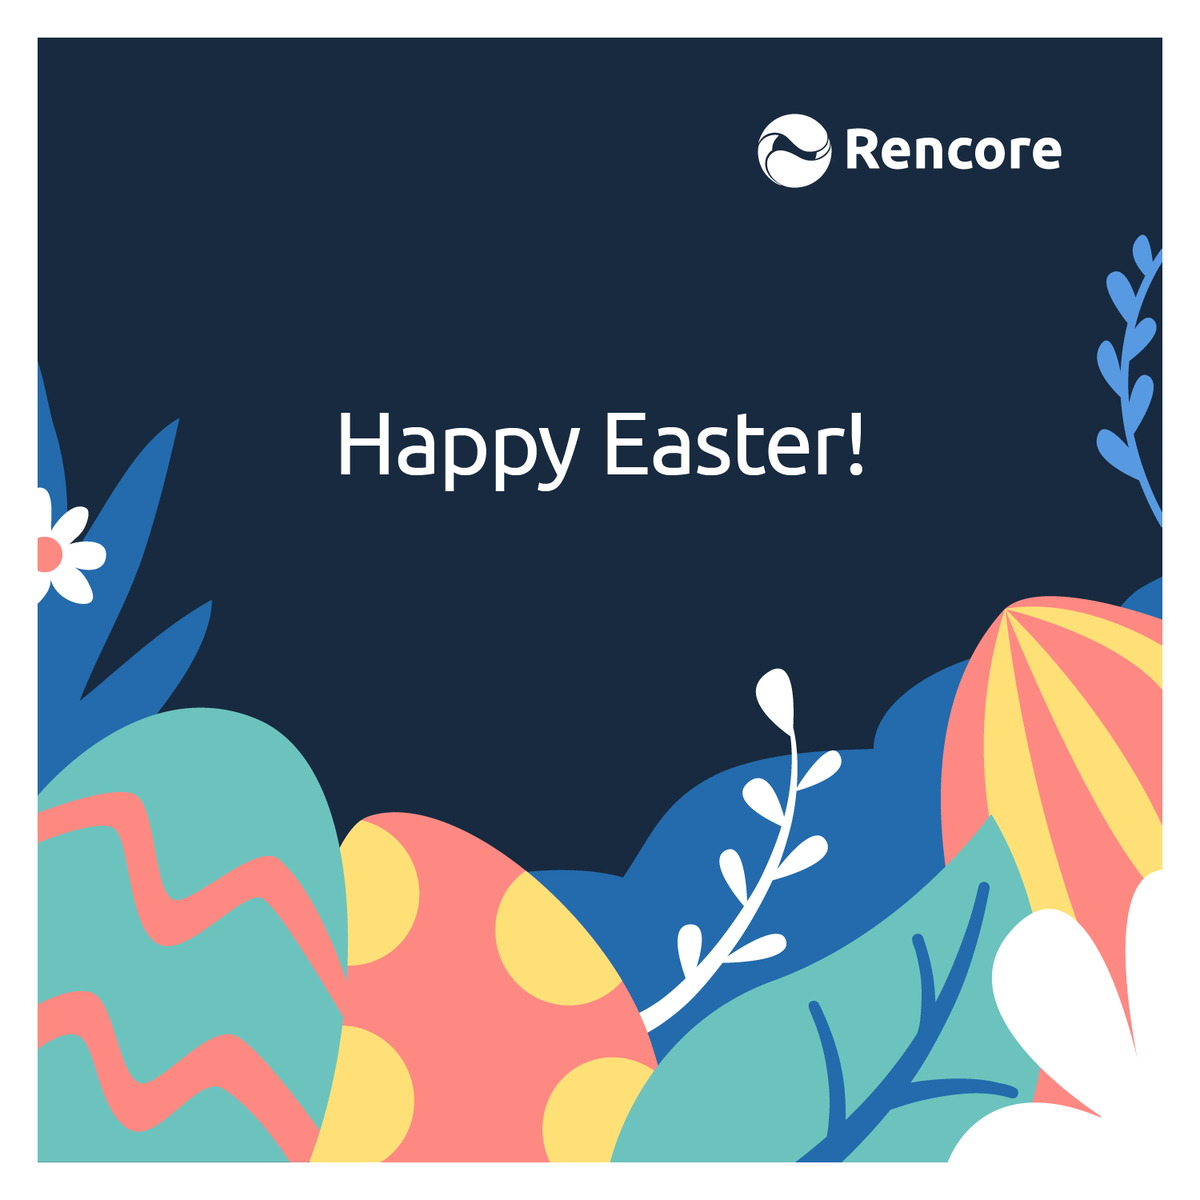 To all our customers, partners, follower and friends, we wish you a Happy Easter and great holidays! 🐣🐰

#EasterHolidays #MicrosoftPartner #RencoreGovernance